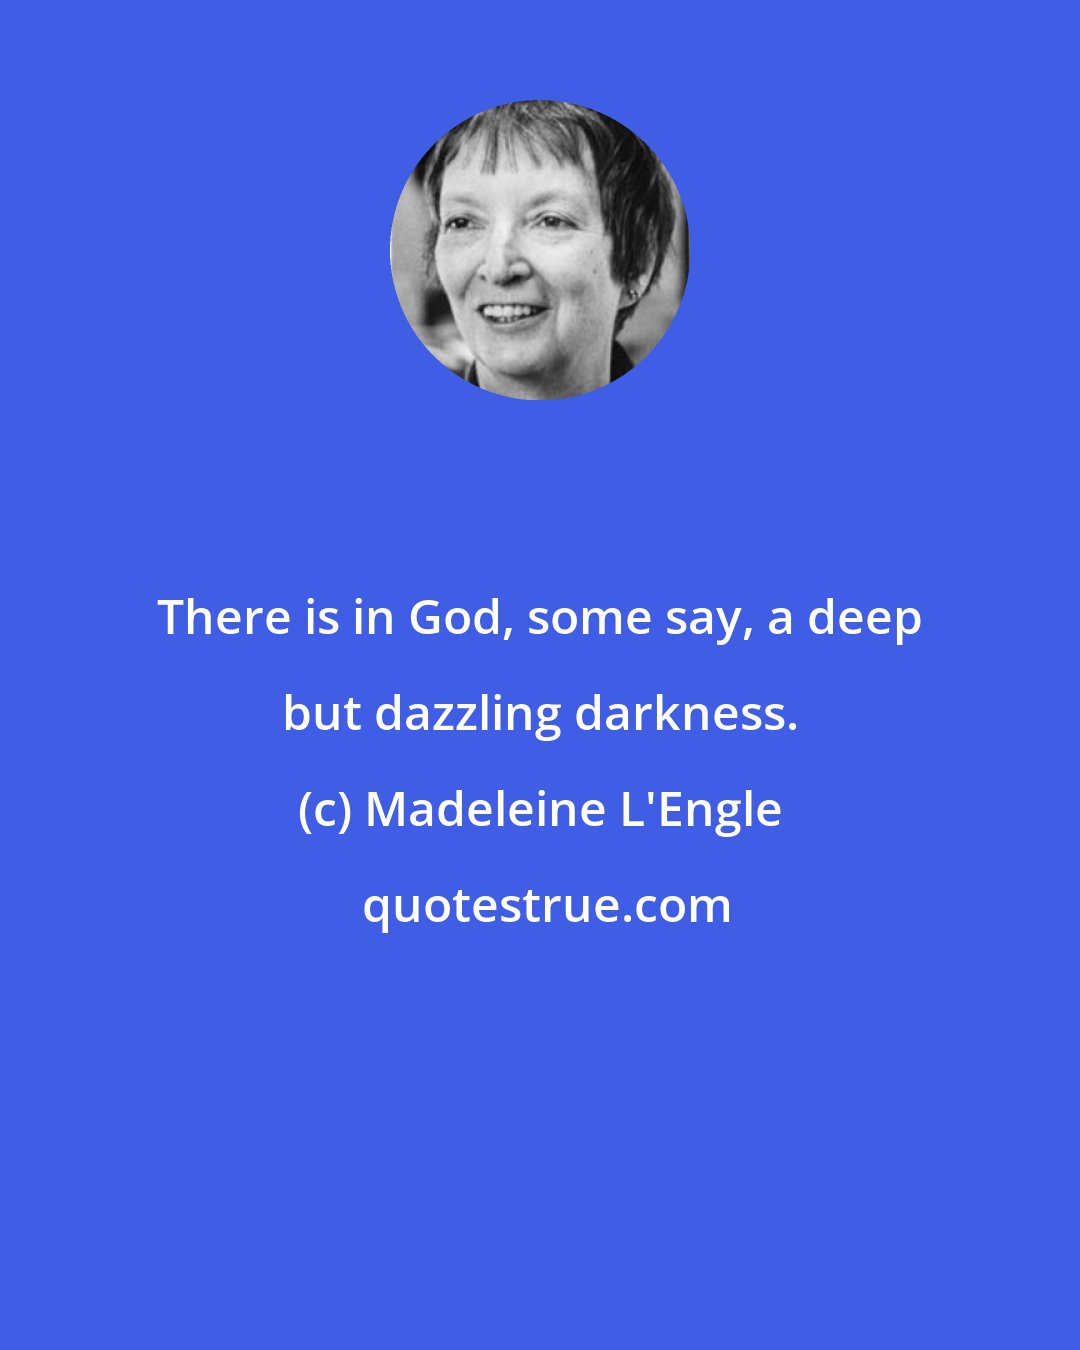 Madeleine L'Engle: There is in God, some say, a deep but dazzling darkness.